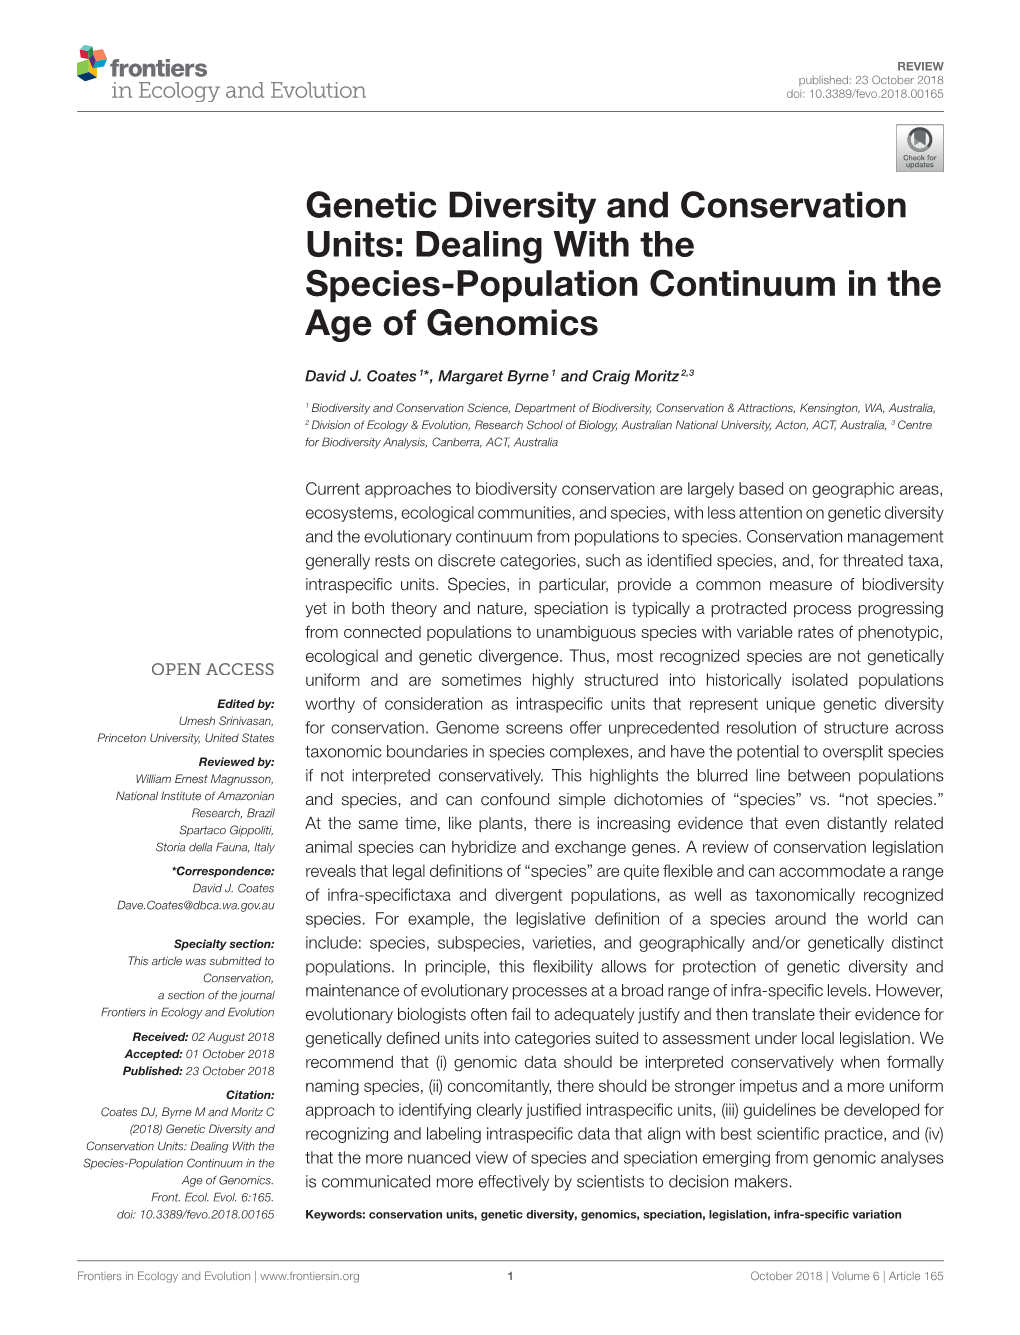 Genetic Diversity and Conservation Units: Dealing with the Species-Population Continuum in the Age of Genomics